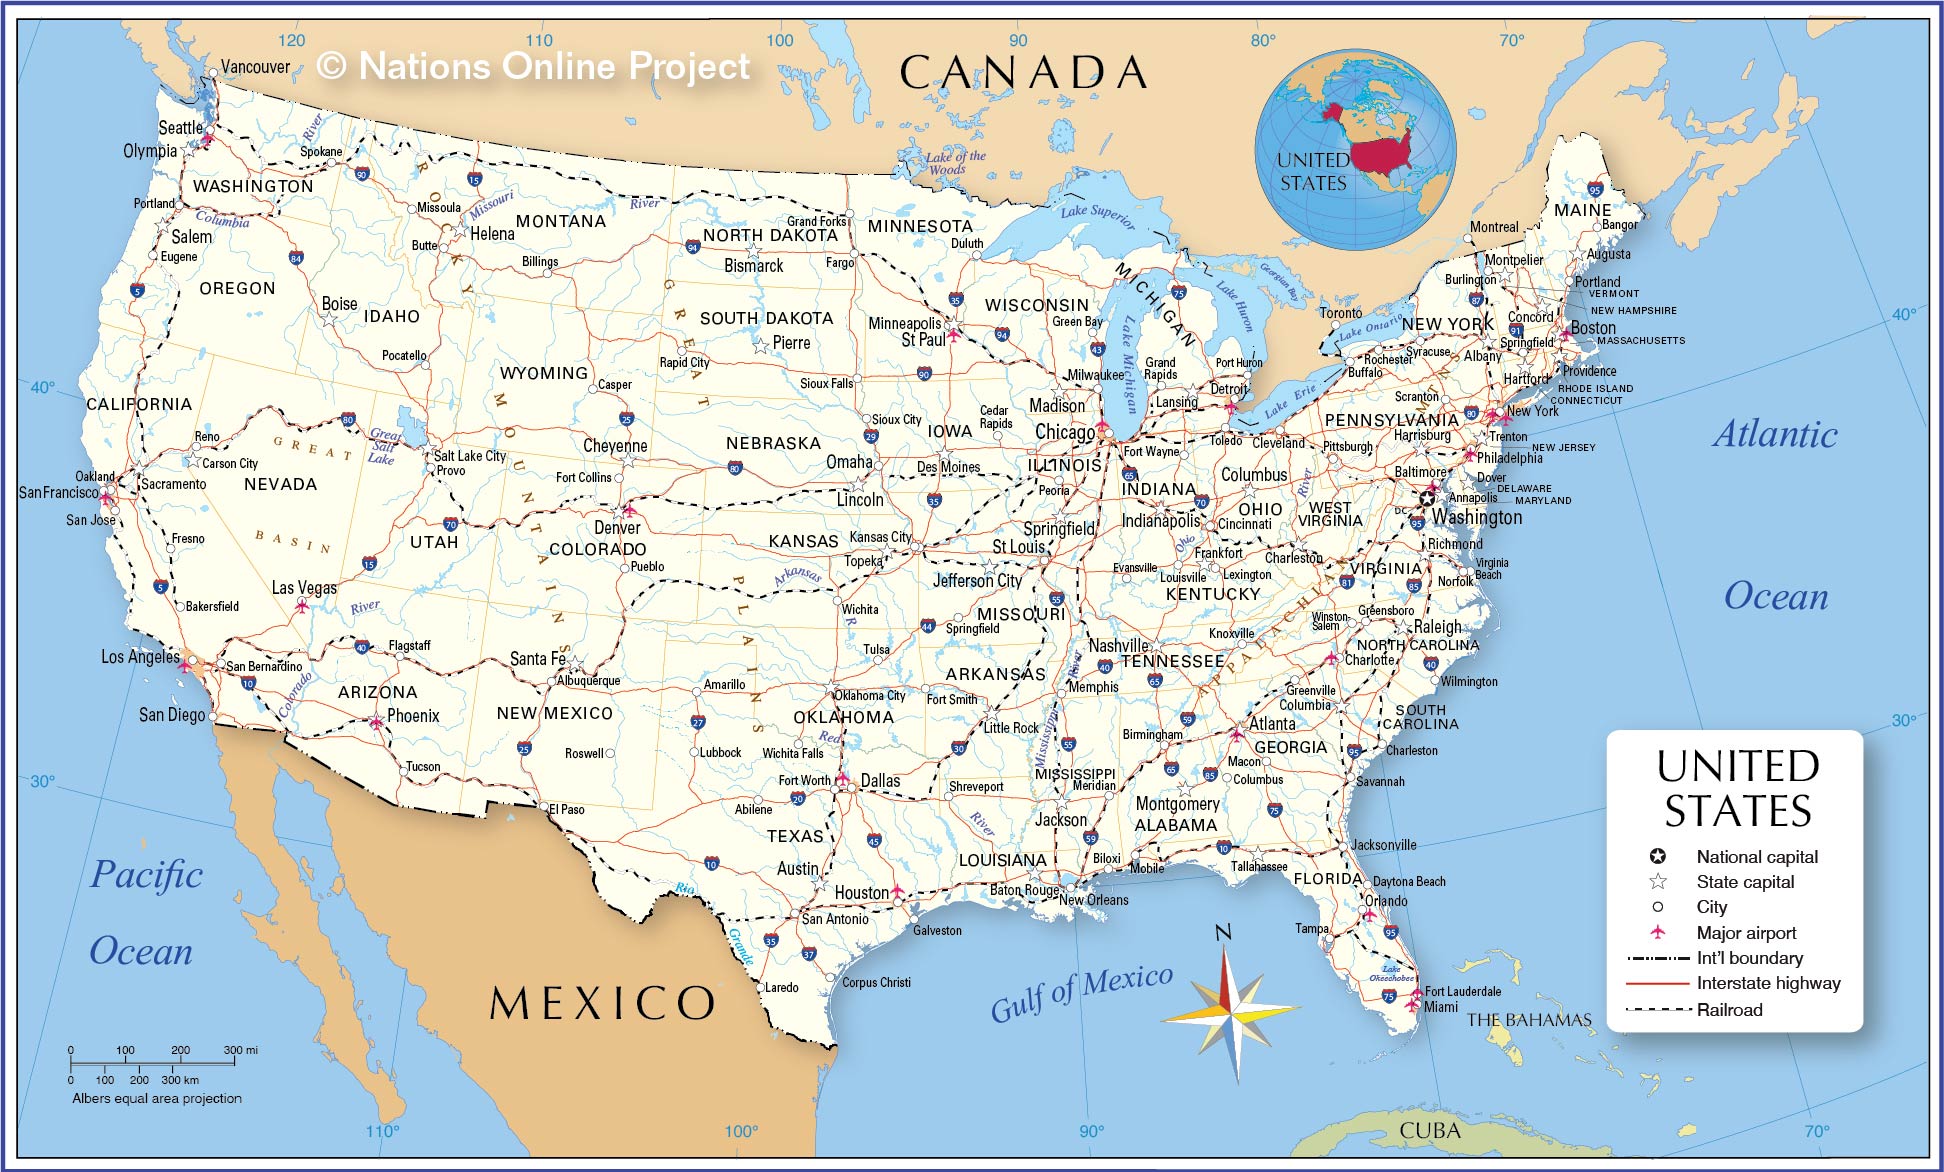 Map of the United States - Nations Online Project